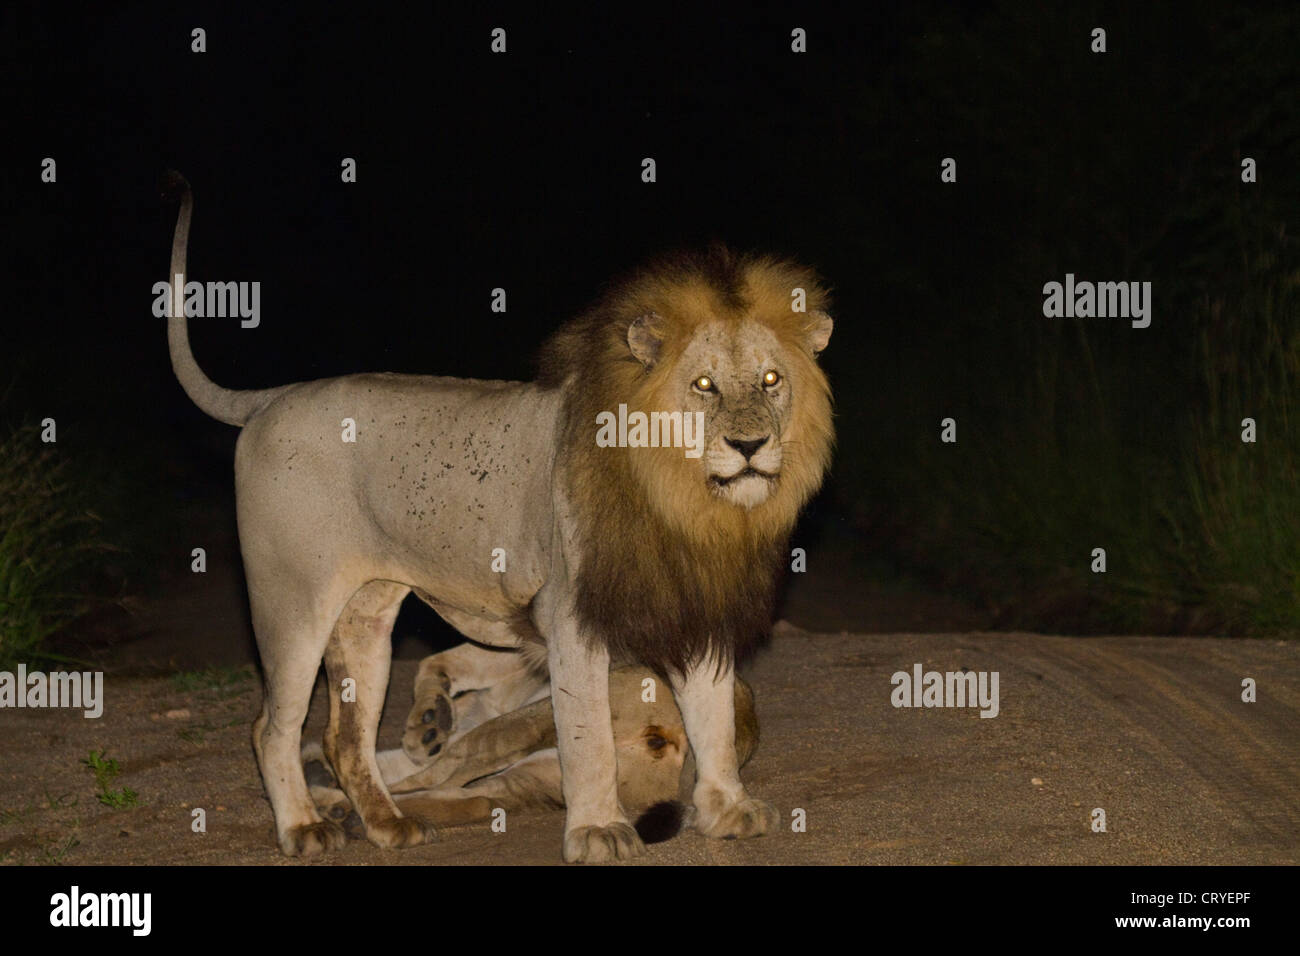 Male lion looking alert with a female asleep on the ground behind him. Stock Photo